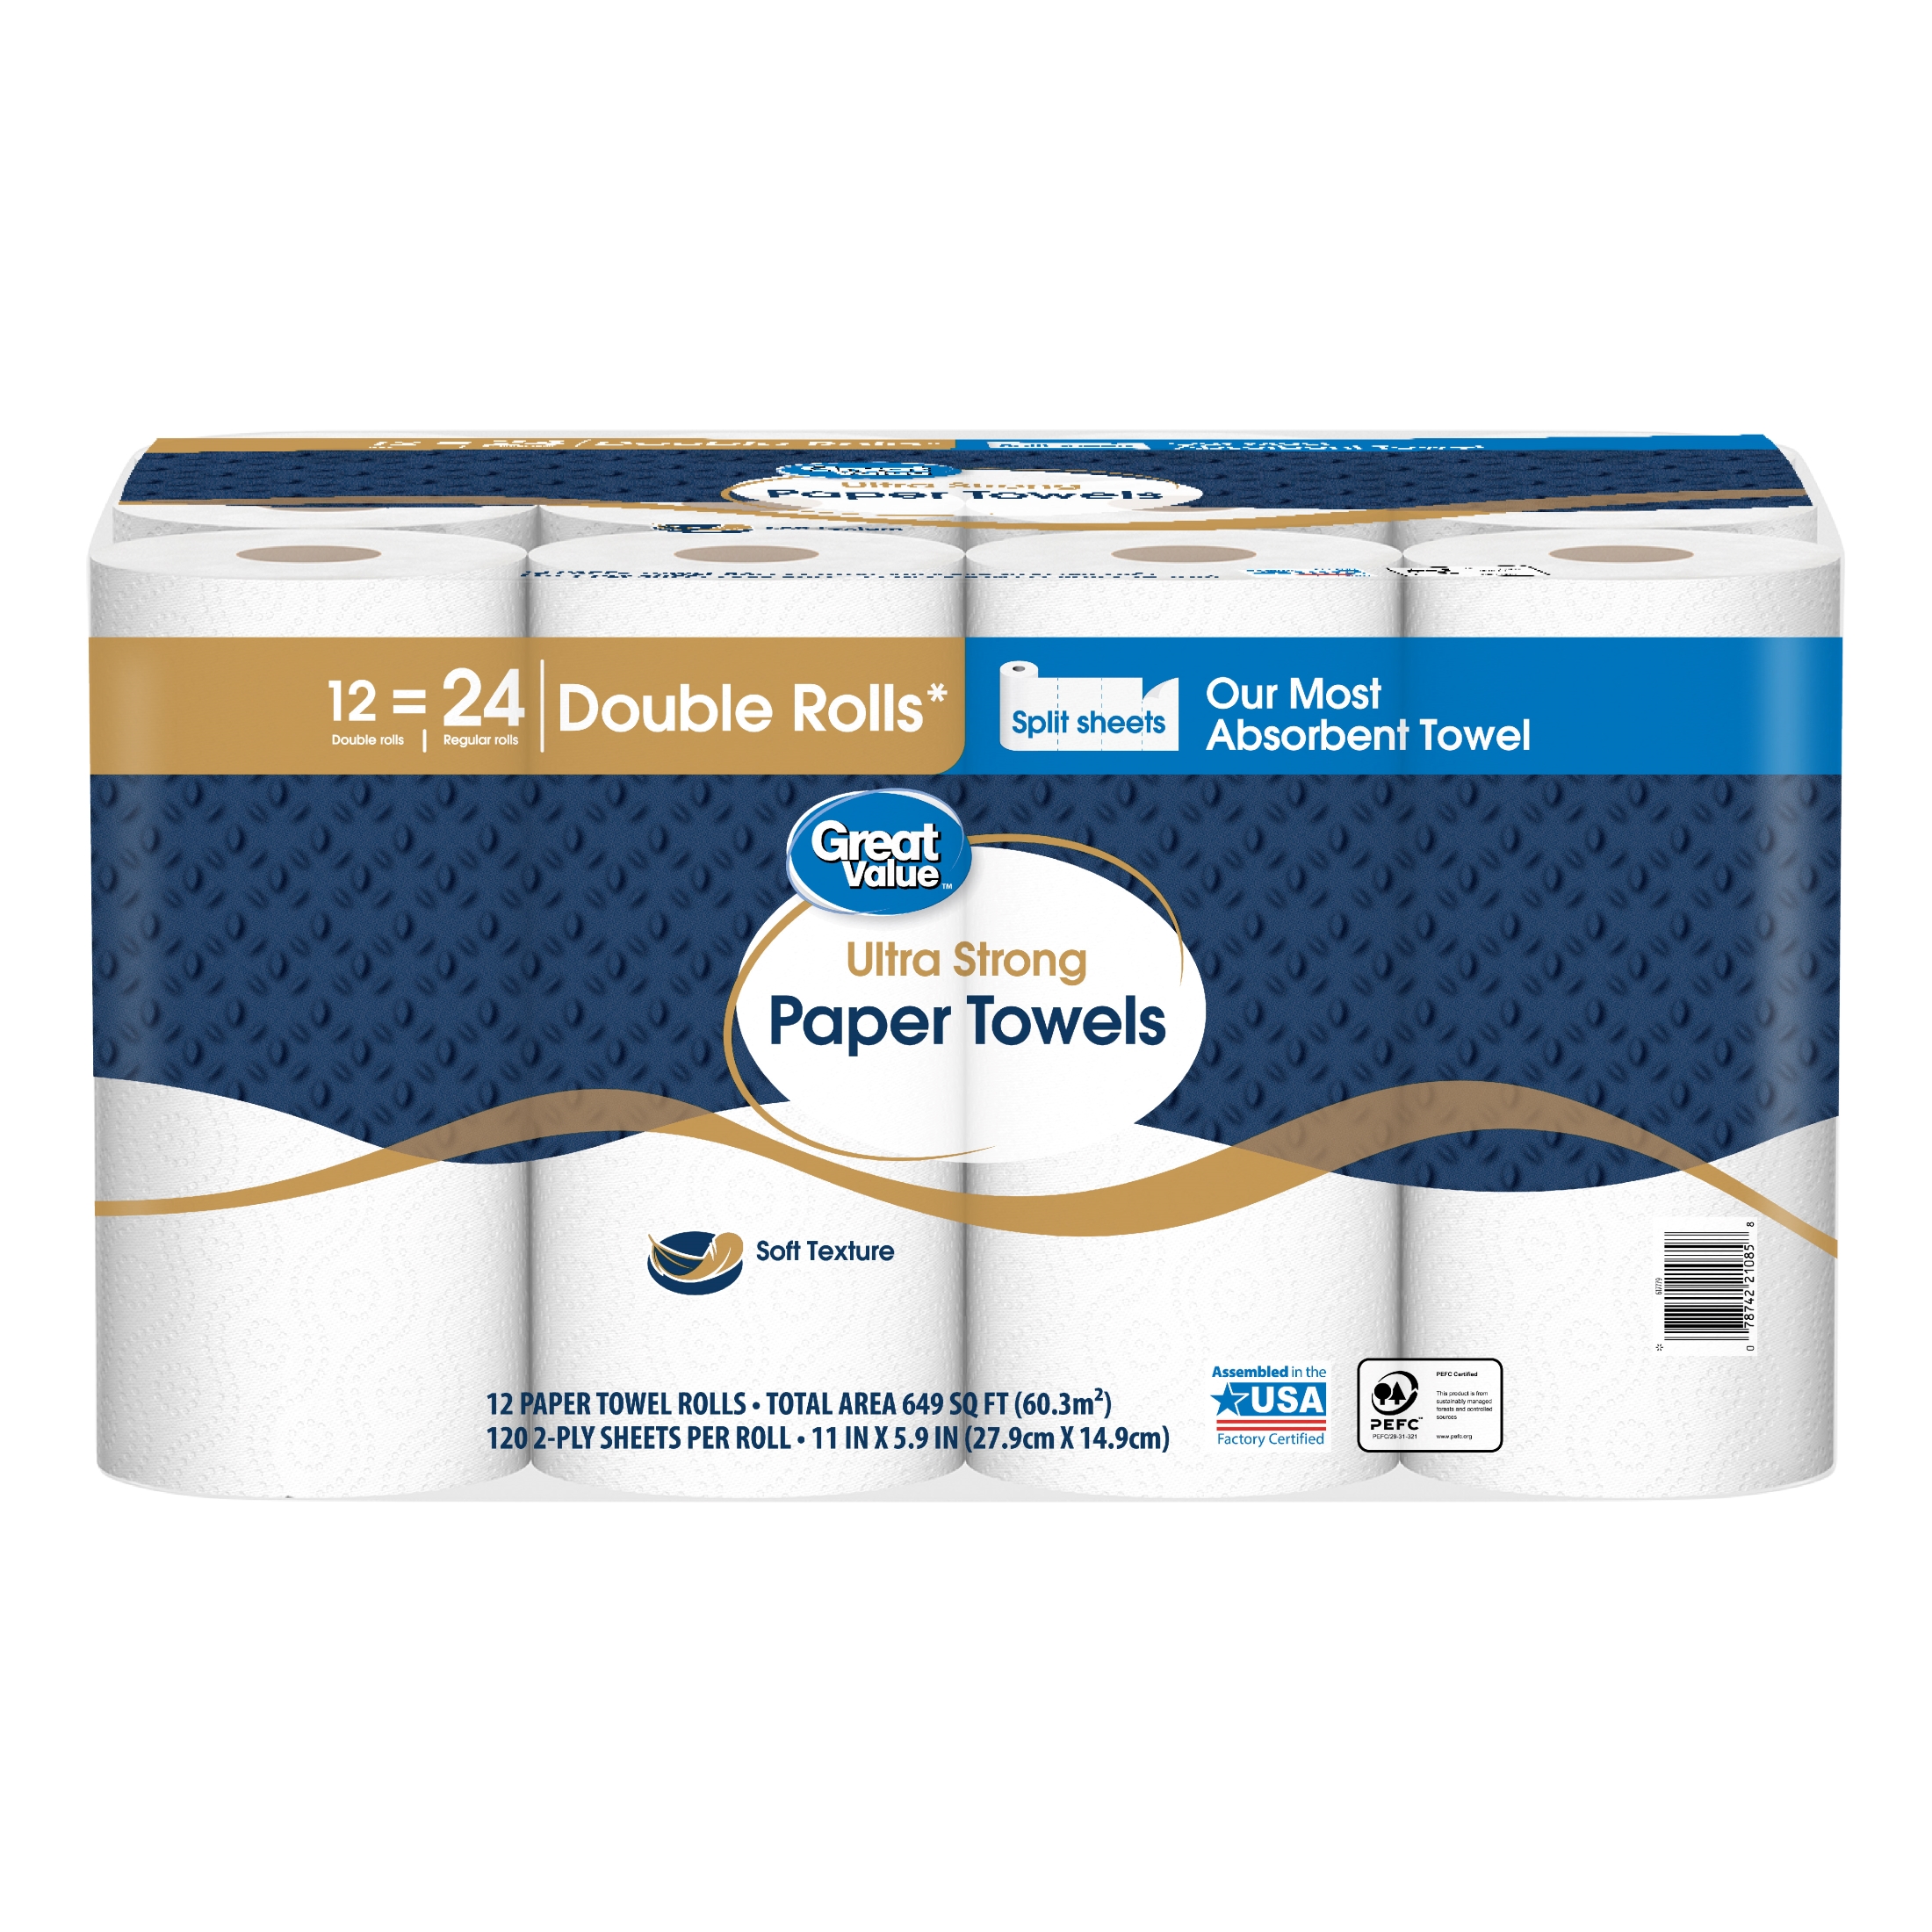 Great Value Ultra Strong Paper Towels, Split Sheets, 12 Double Rolls - image 2 of 10